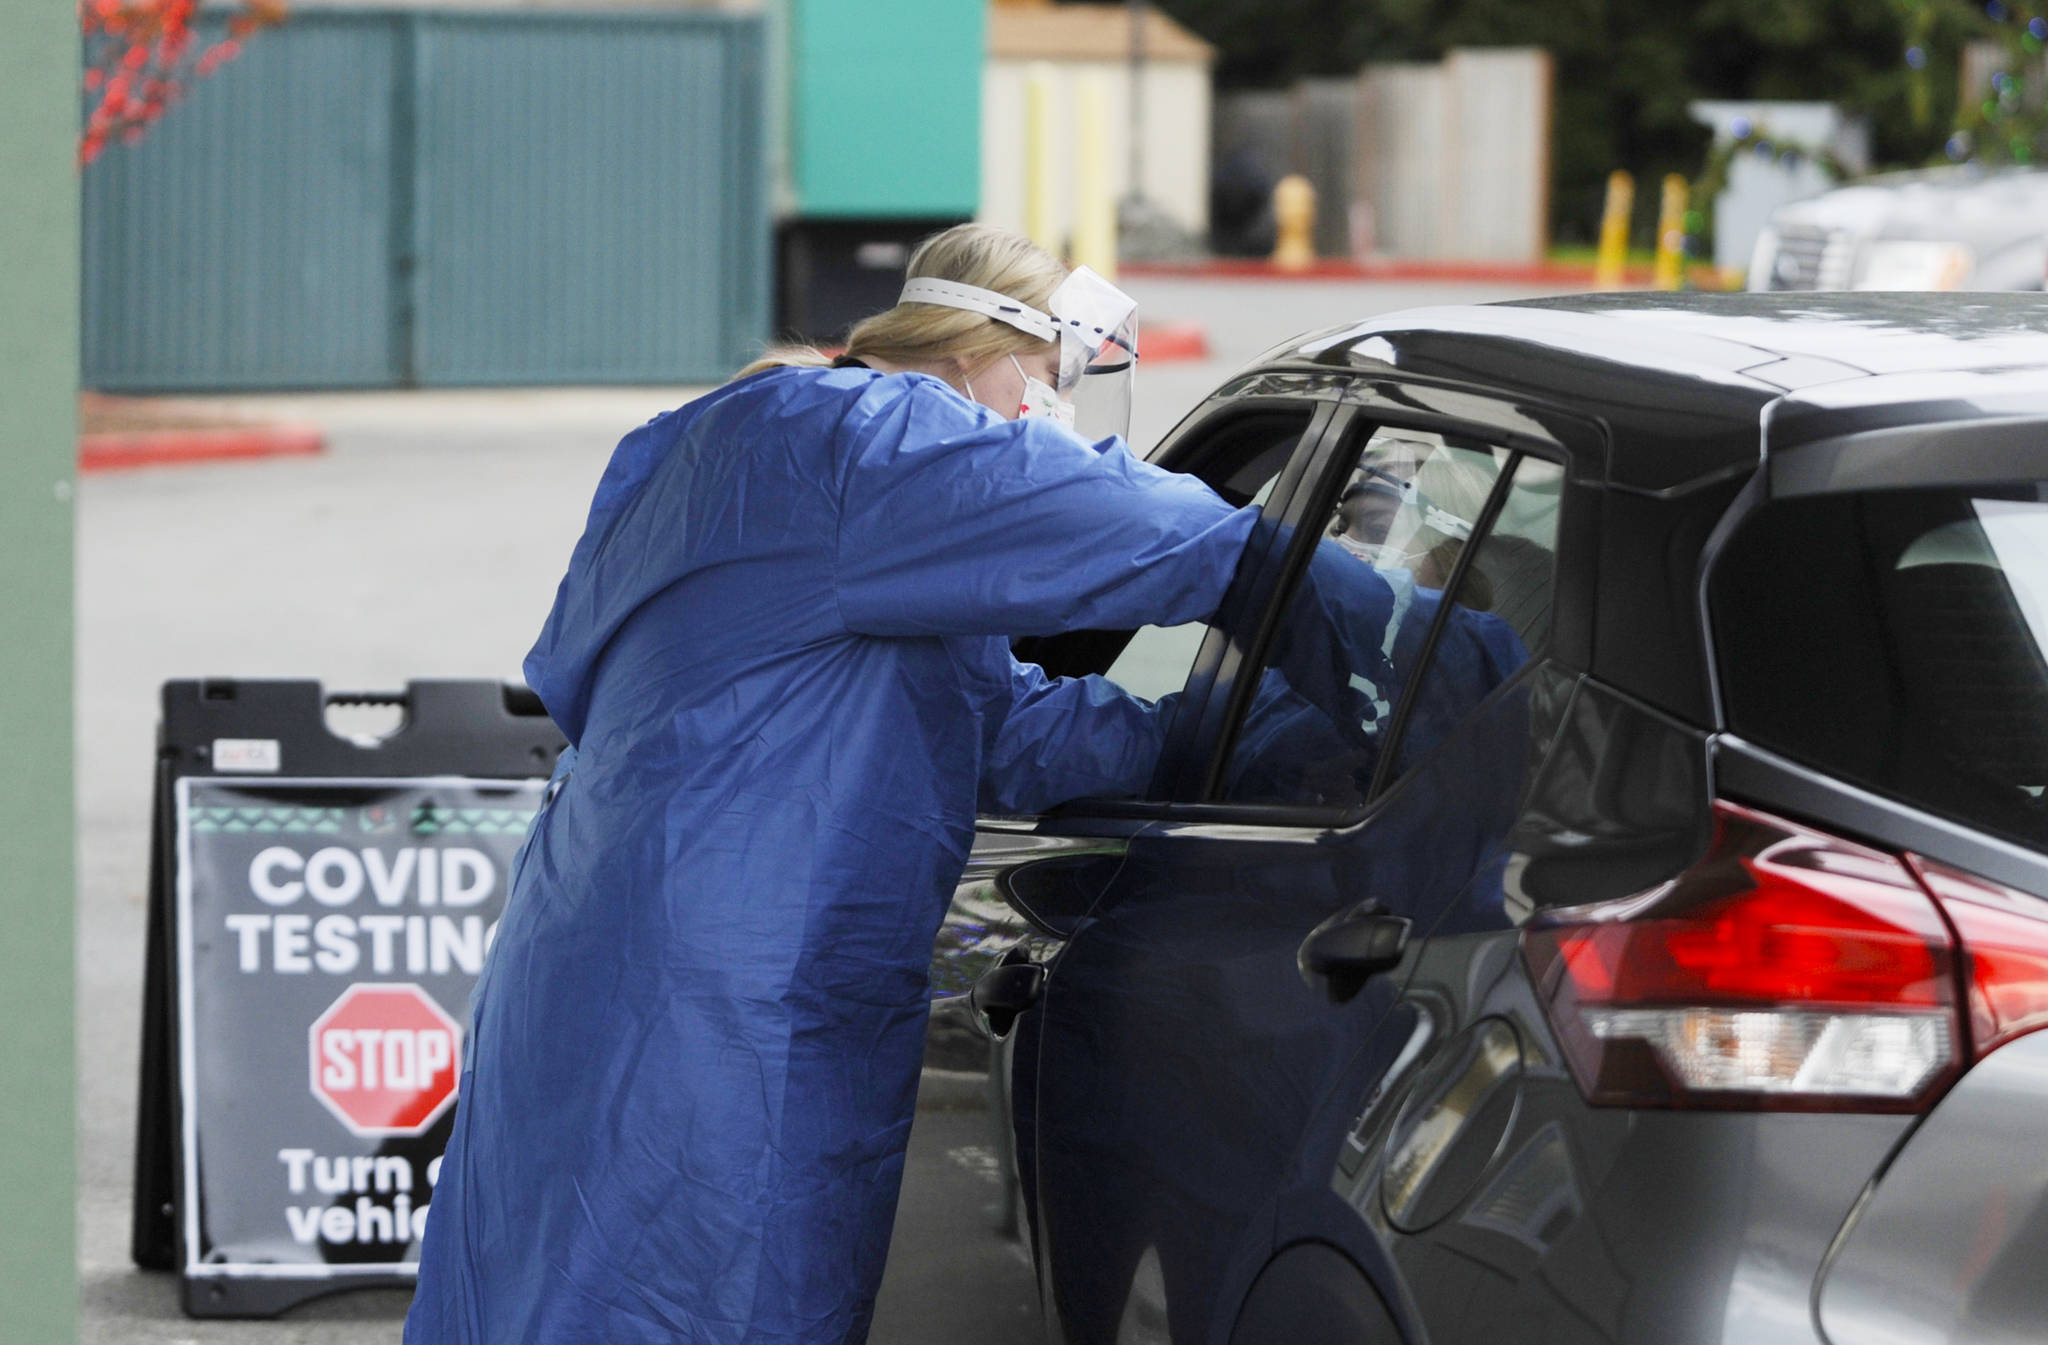 Licensed practical nurse administers a COVID-19 test at the Jamestown Family Clinic’s drive-up testing site on Dec. 7. Sequim Gazette photo by Michael Dashiell